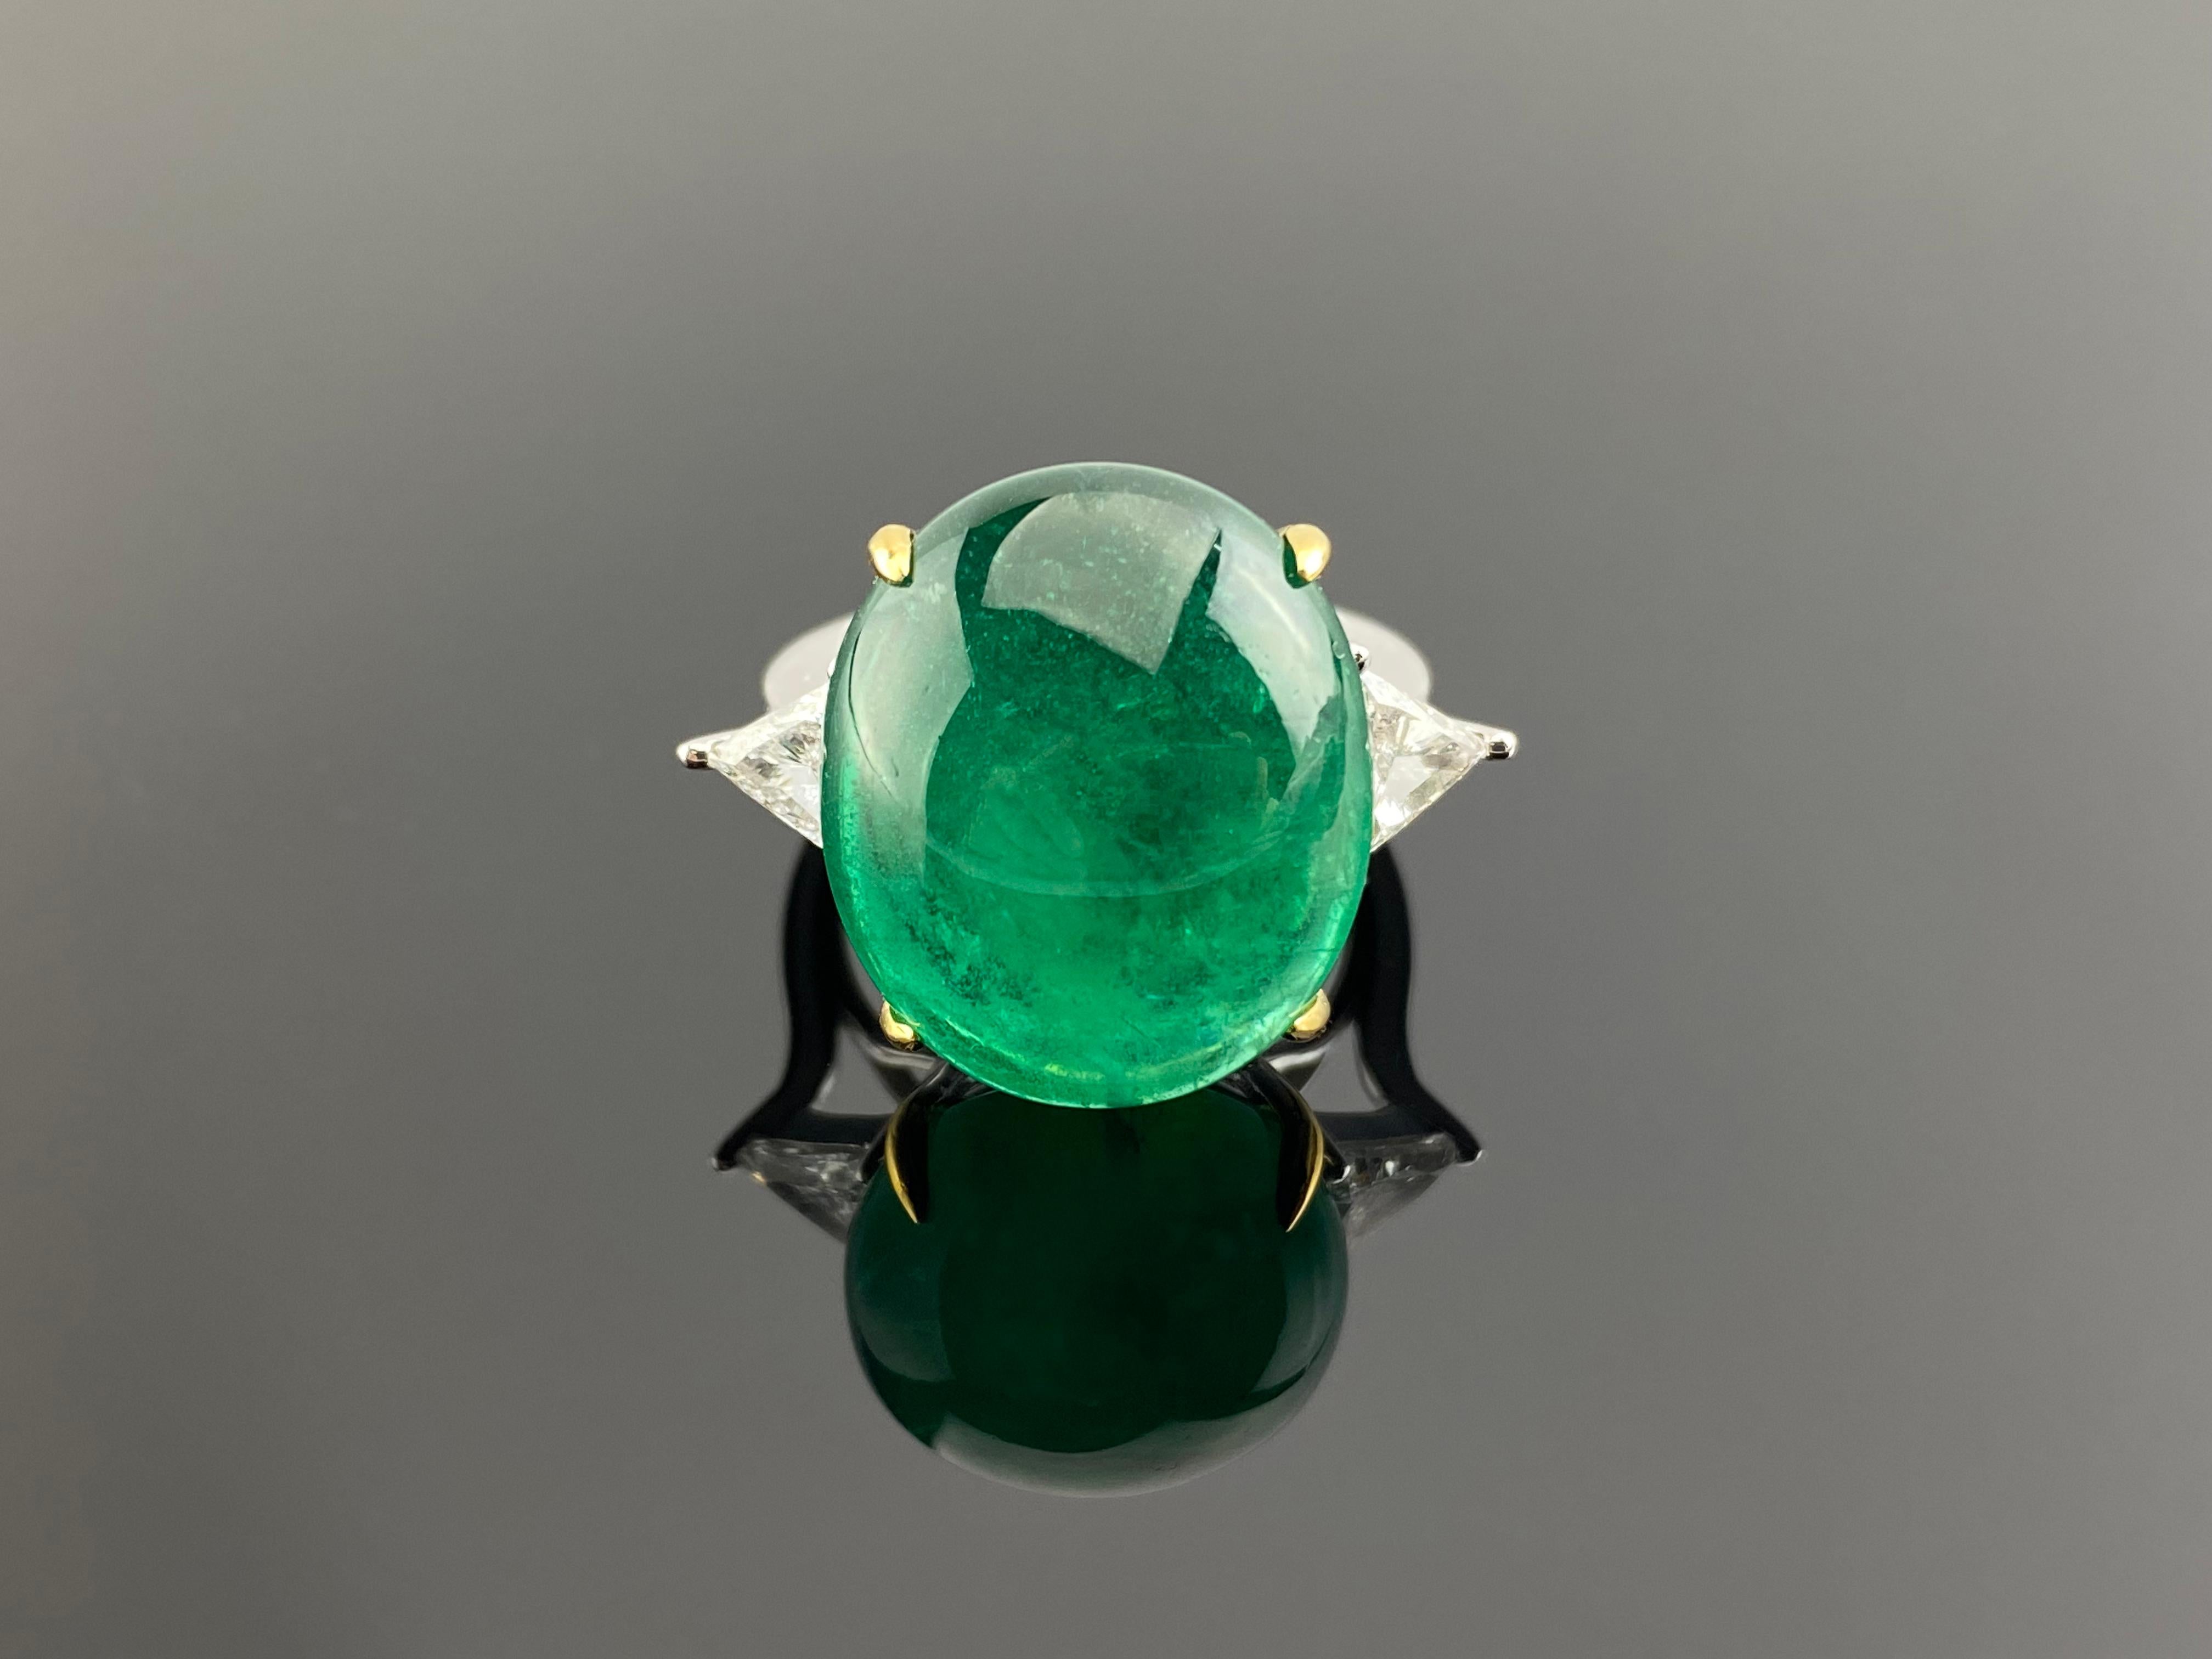 Make a statement with this stunning 20.47 carat Emerald Cabochon and 0.71 carat trillion shaped VVS quality white Diamond engagement ring. The natural Emerald originates from Zambia, and has a beautiful vivid green color, and is not treated. The